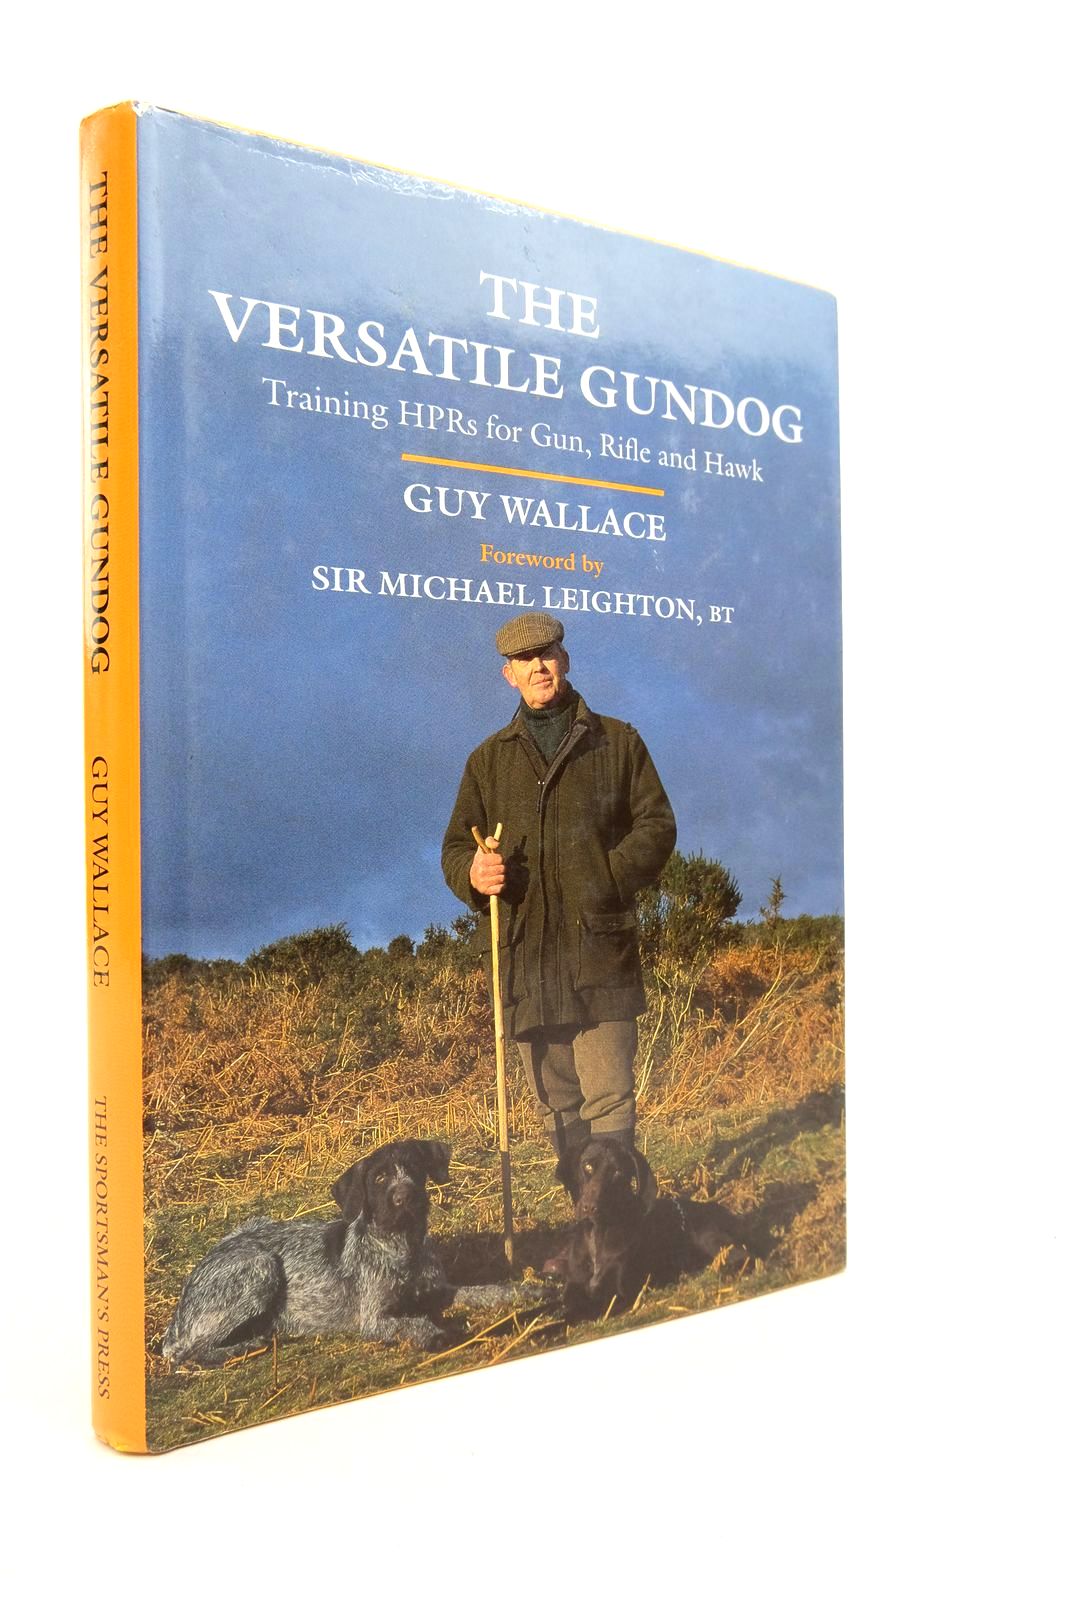 Photo of THE VERSATILE GUNDOG written by Wallace, Guy published by The Sportsman's Press (STOCK CODE: 2139651)  for sale by Stella & Rose's Books